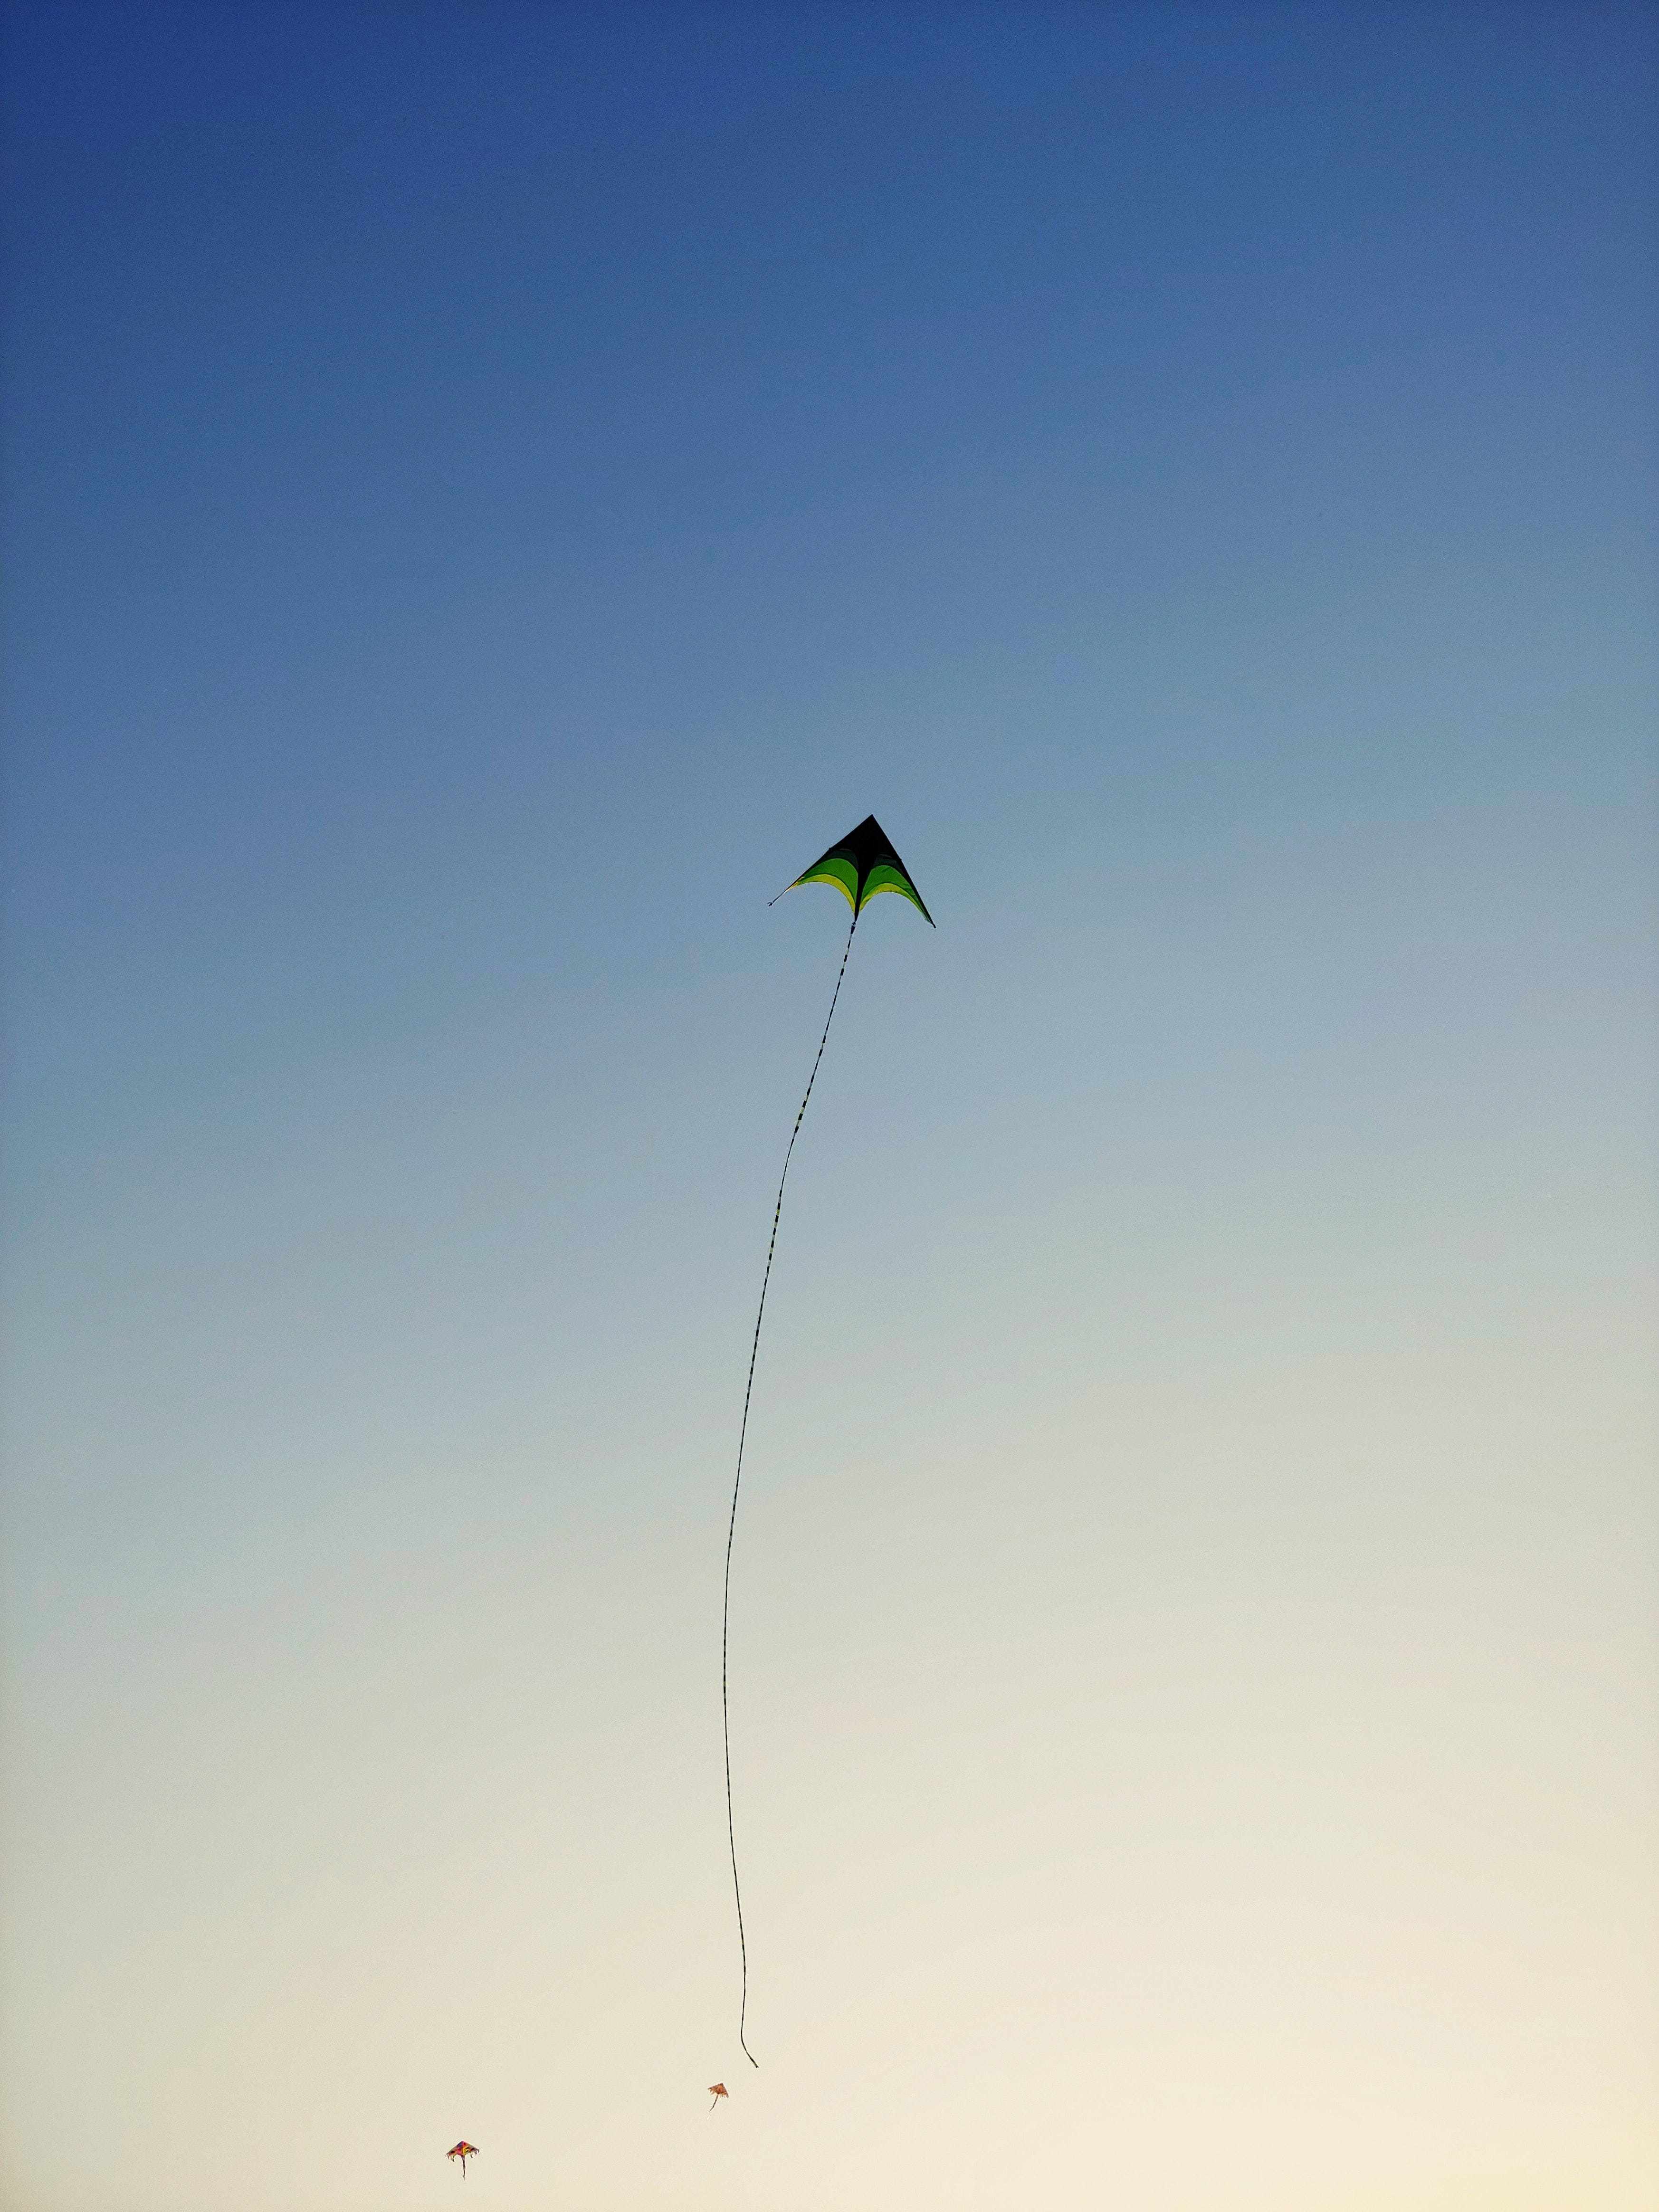 Kite photos download the best free kite stock photos hd images